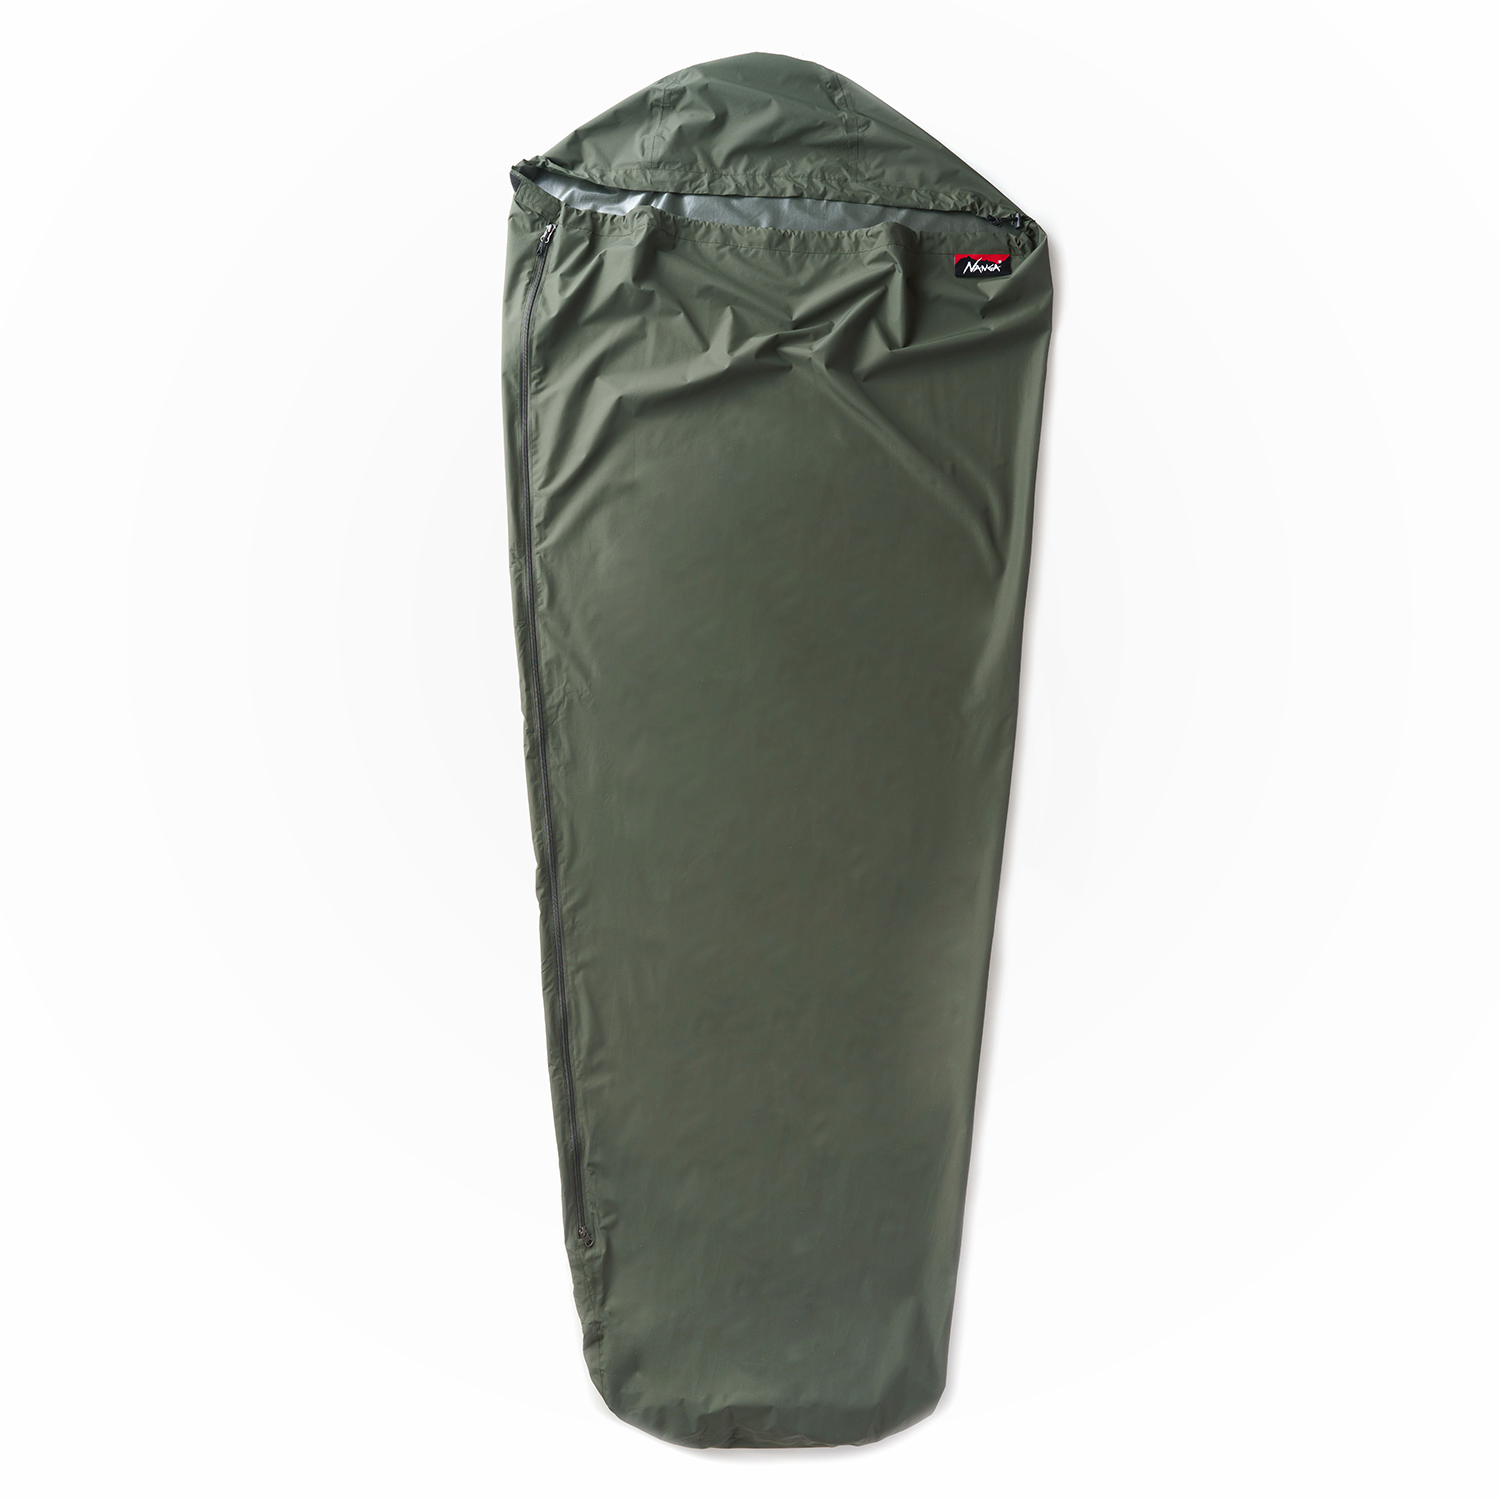 NATO Military Surplus Sleeping Bag Cover Like New  725095 Camo Sleeping  Bags at Sportsmans Guide